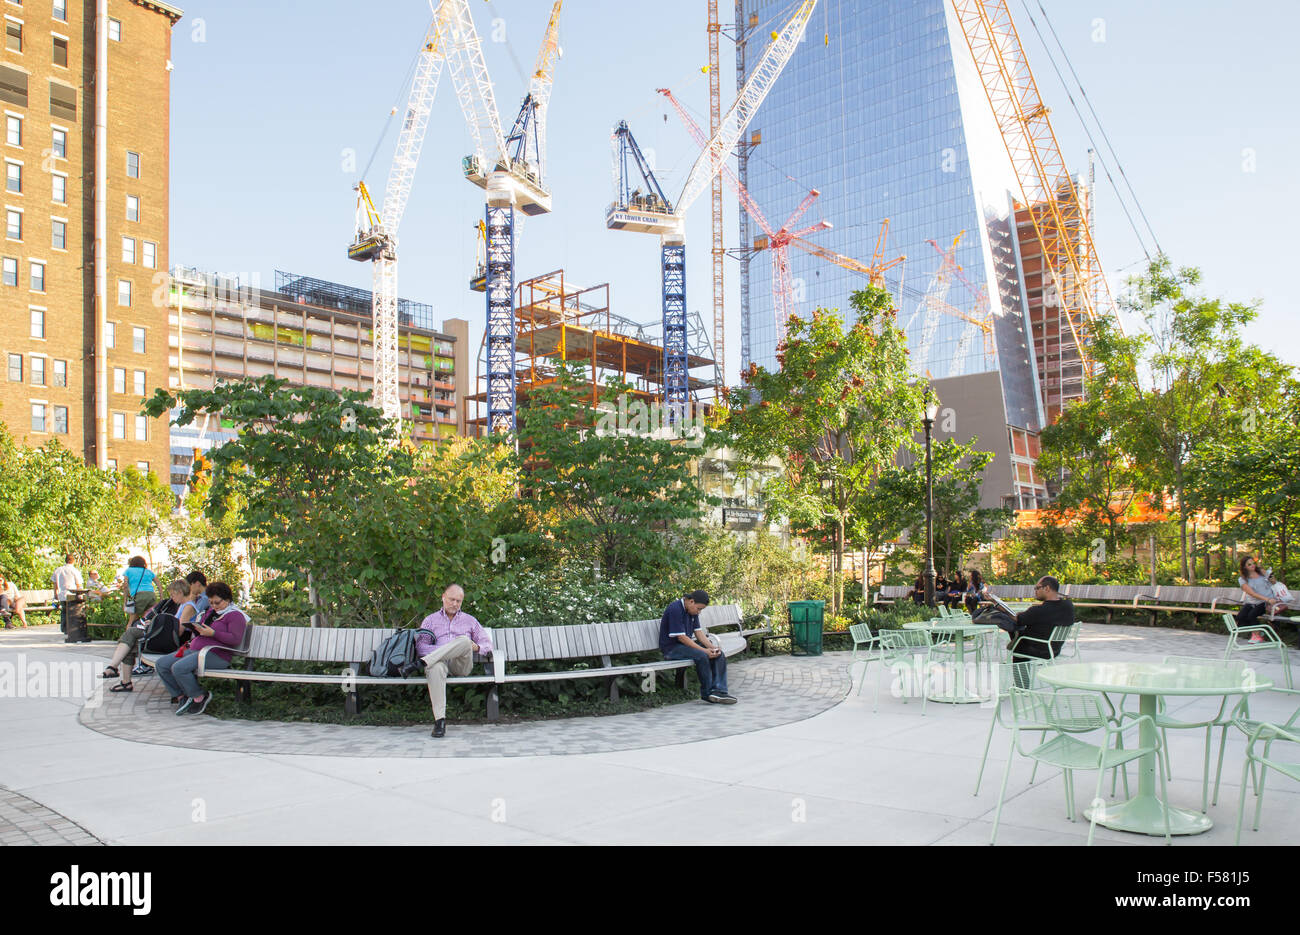 NEW YORK CITY - SEPTEMBER 14, 2015: View of newly developed Hudson Yards Park in Manhattan with people visible. Stock Photo